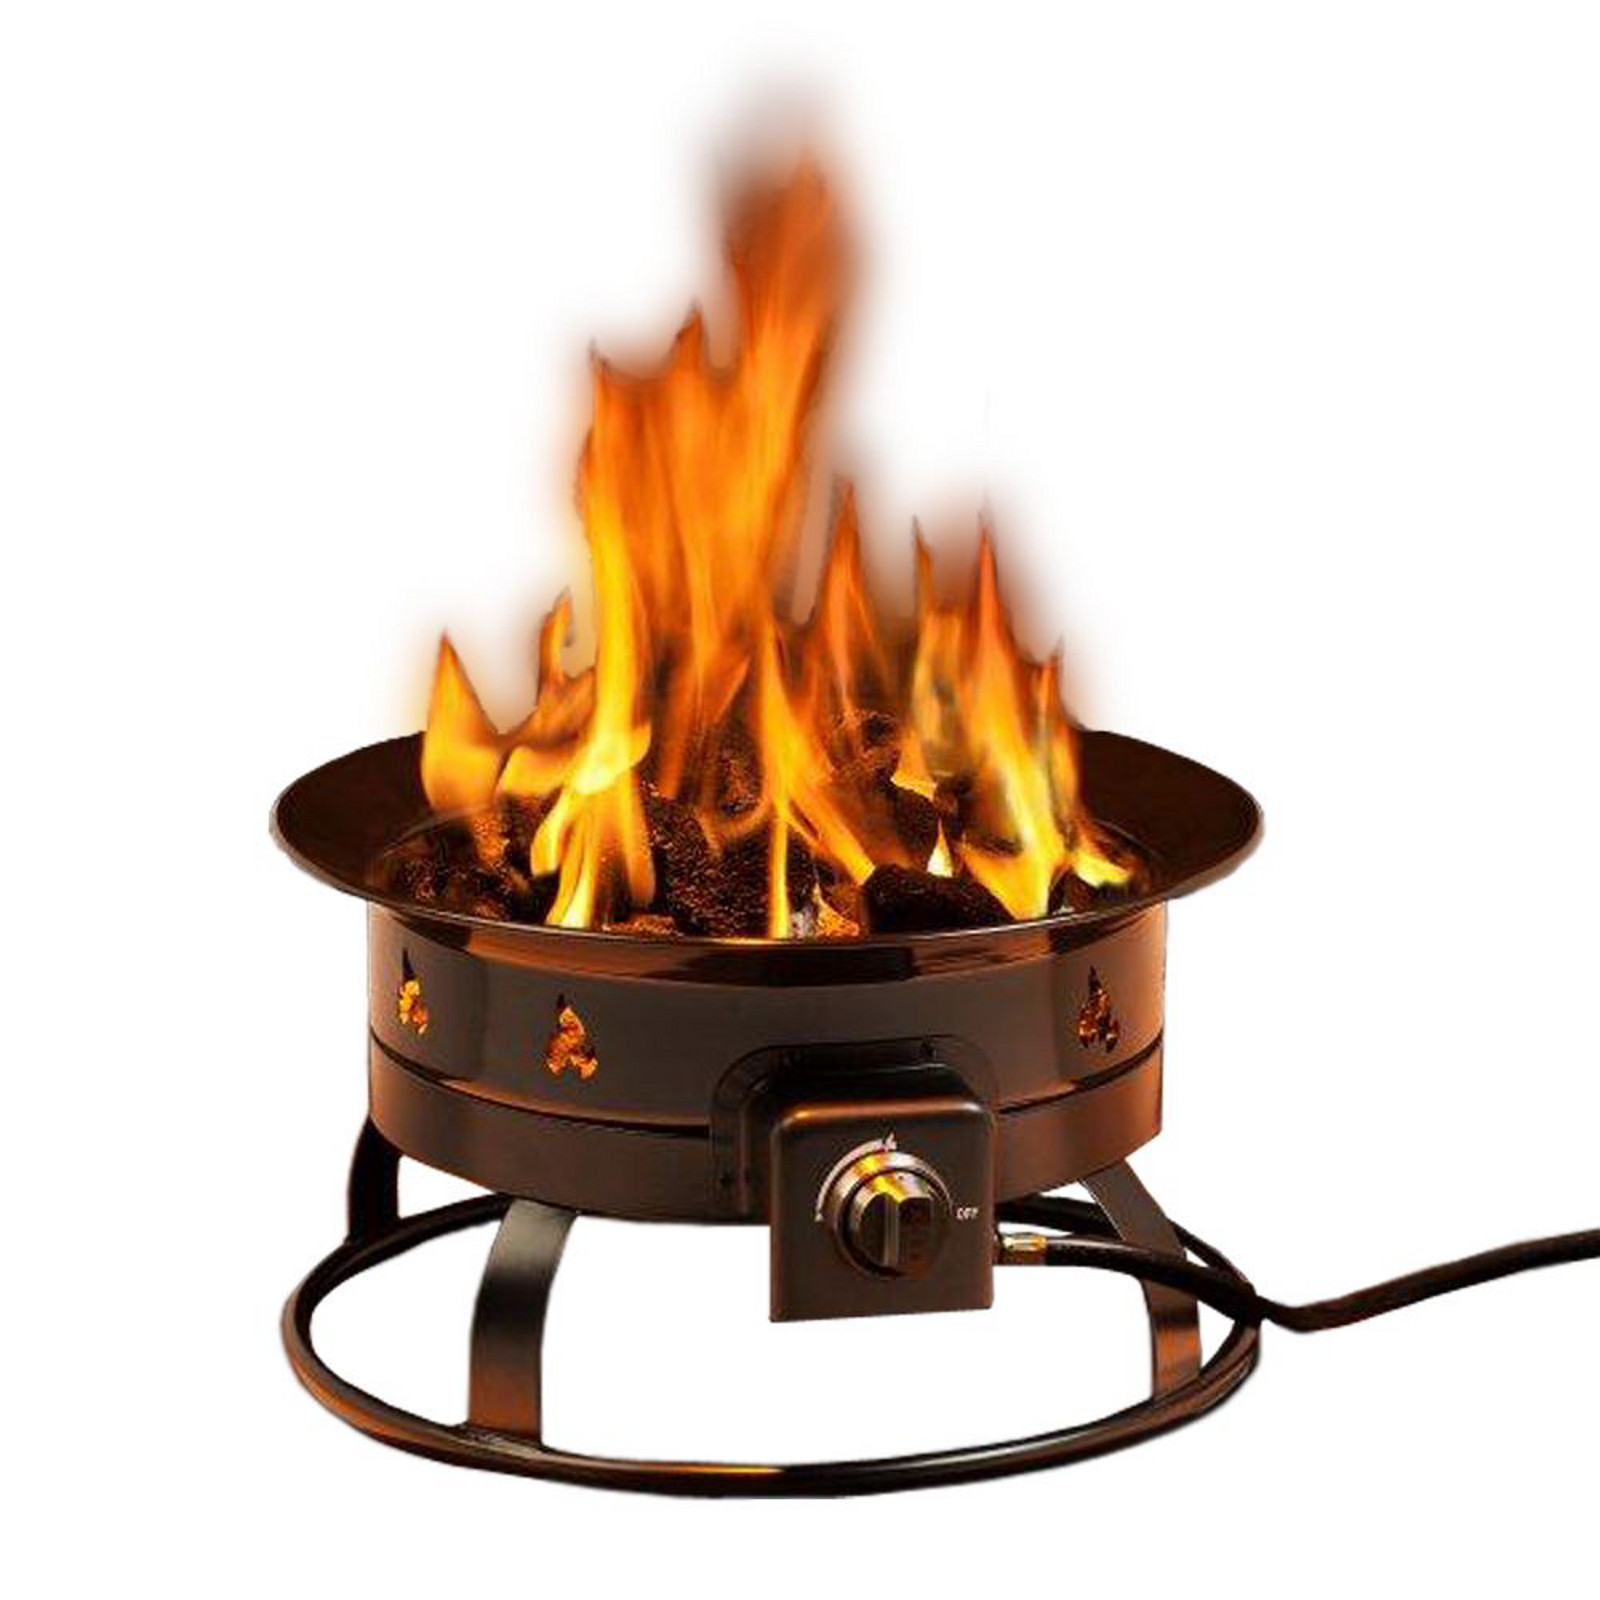 Heininger Portable Propane Outdoor Fire, Clean Burning Fire Pit